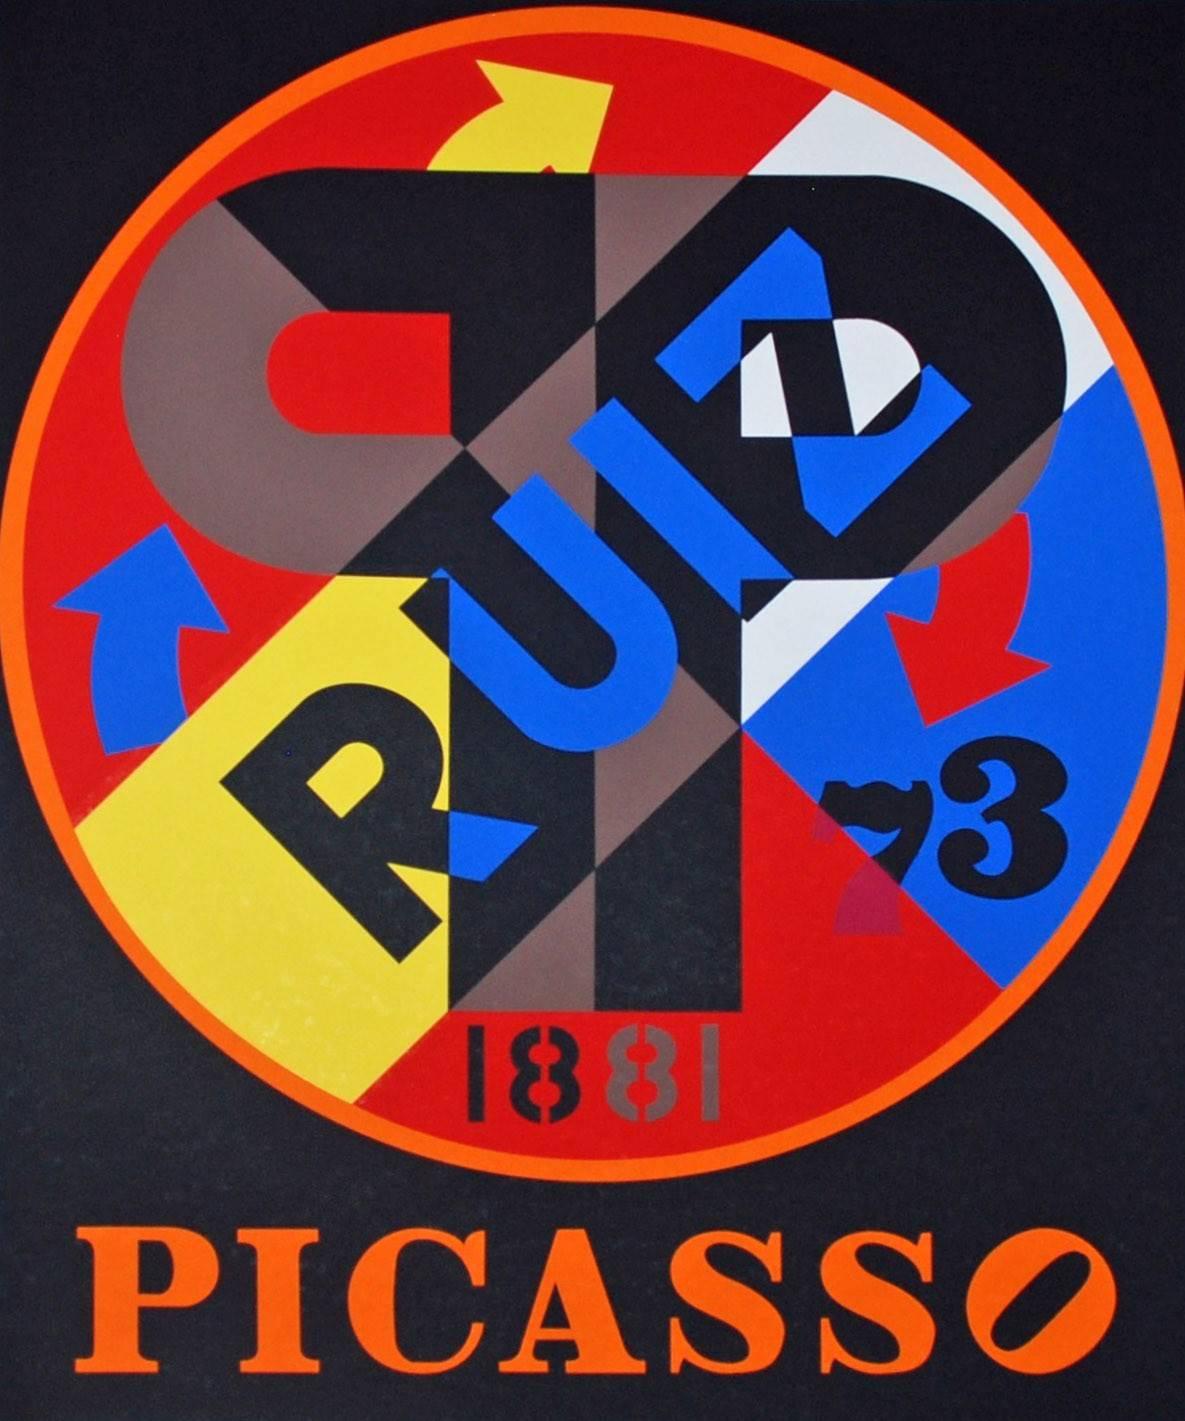 Picasso - Print by Robert Indiana